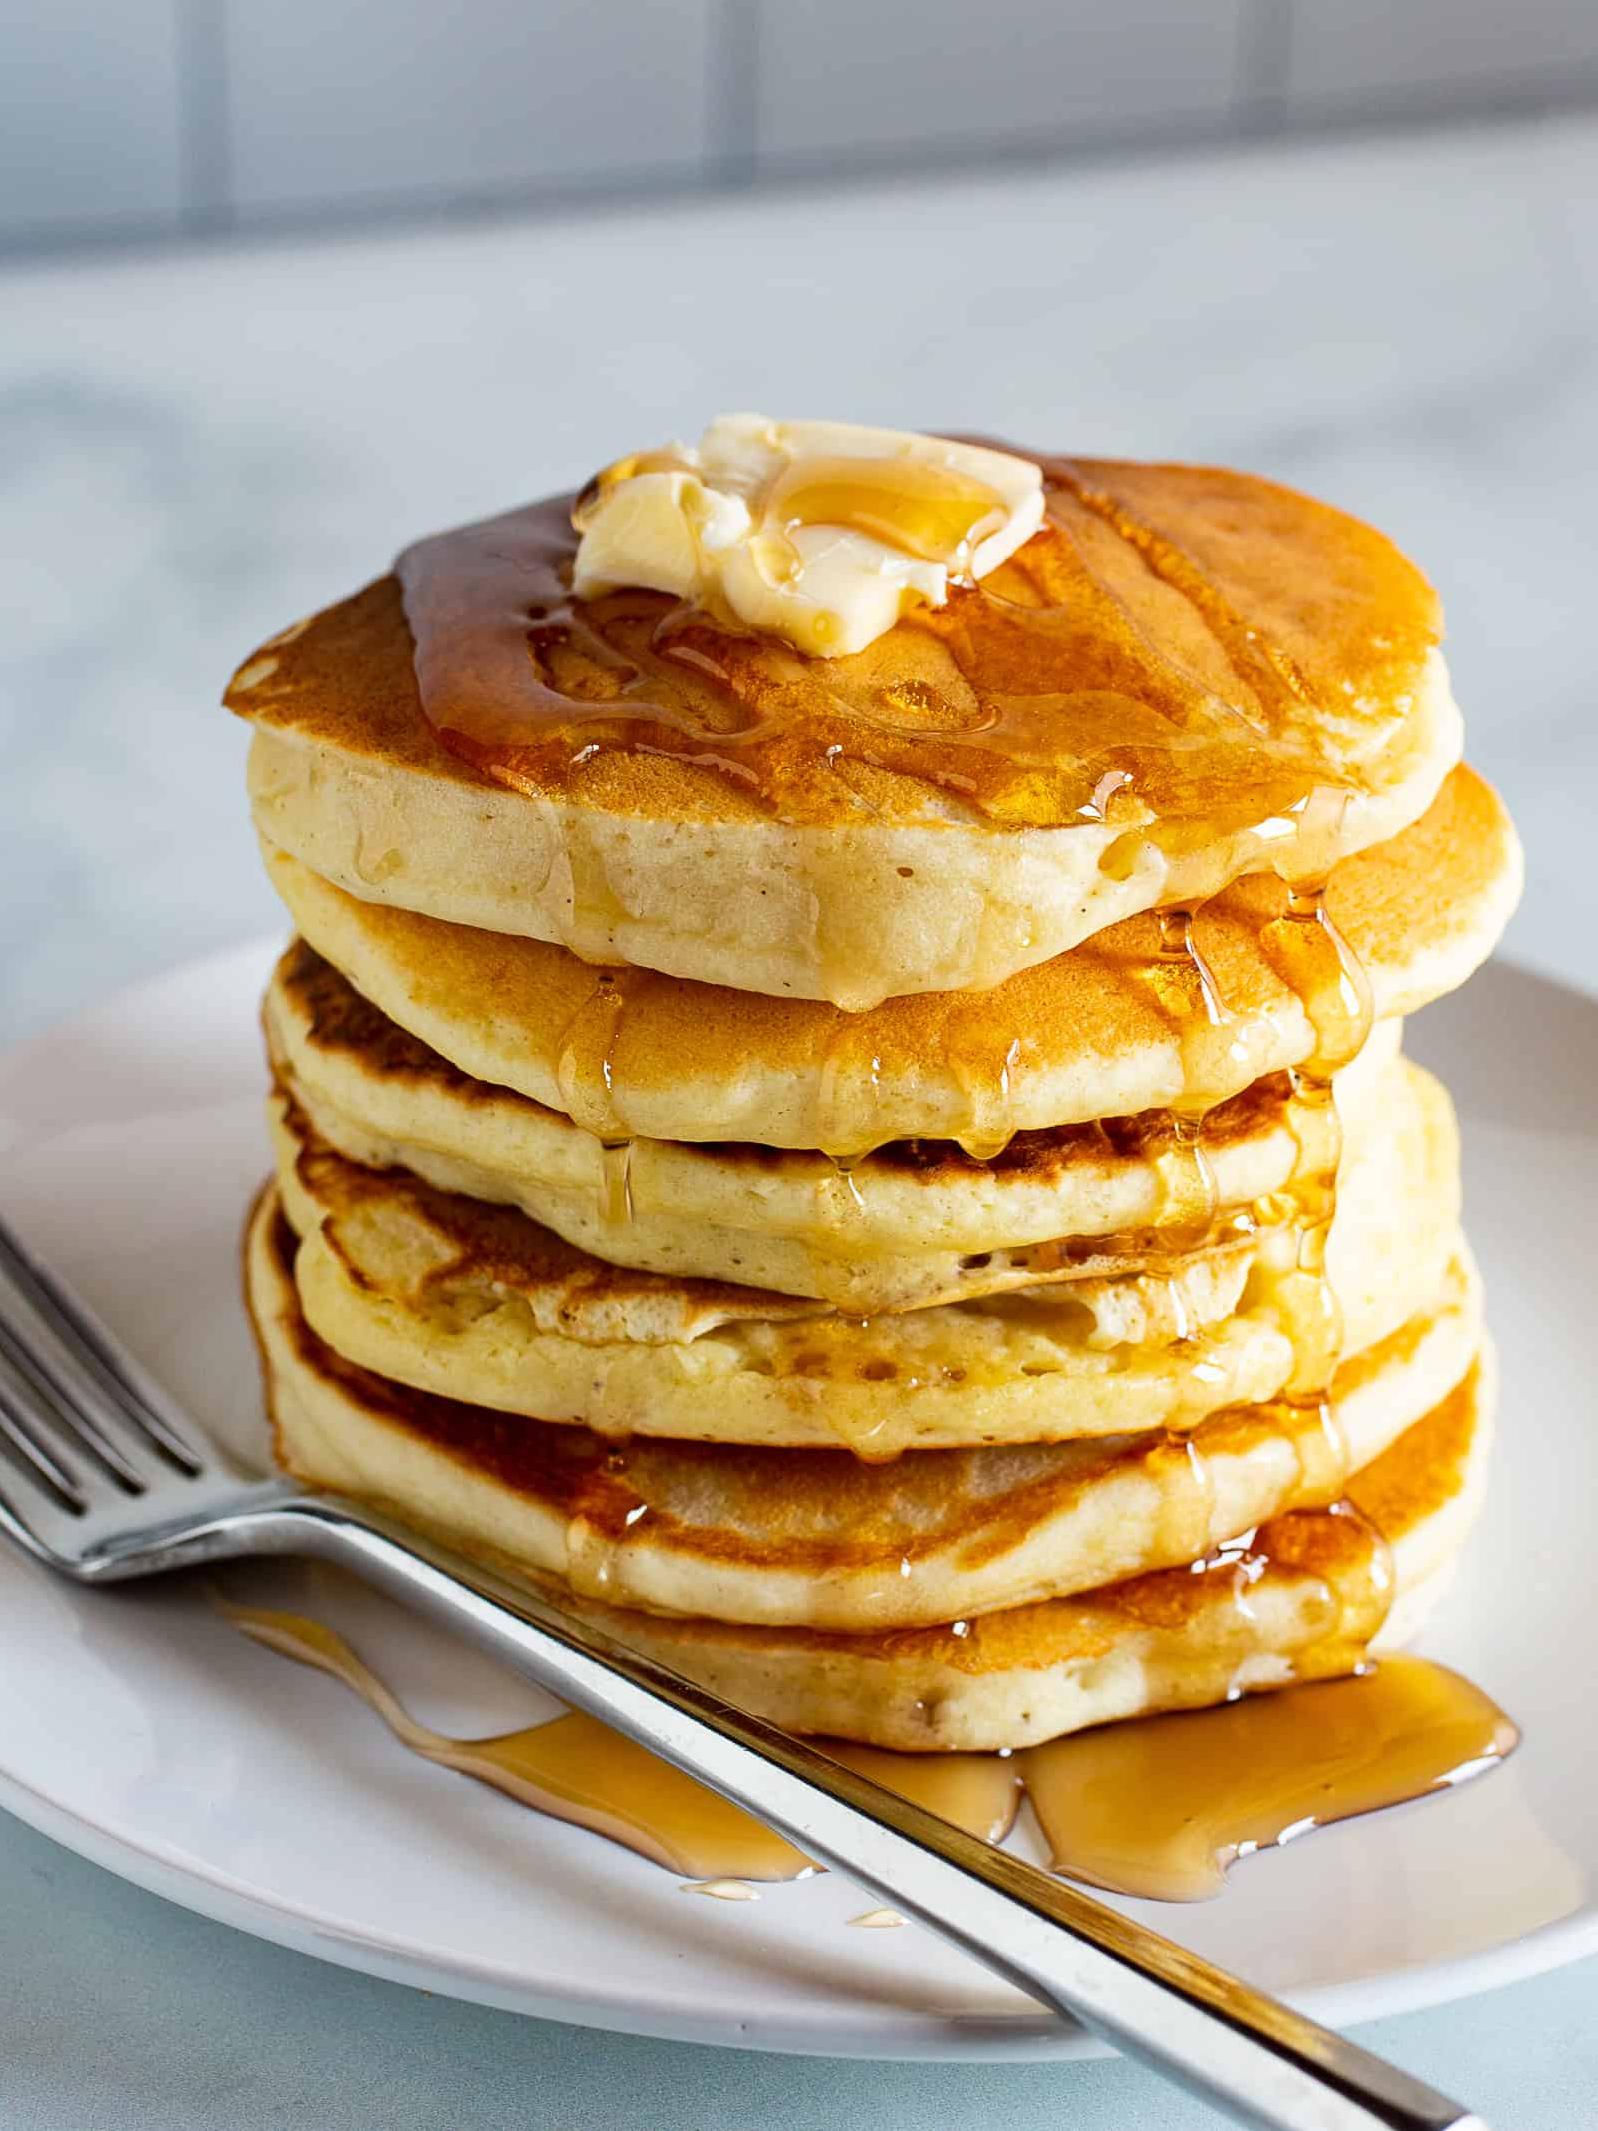  Who says you can't have gluten-free pancakes that taste just as good as regular ones?!